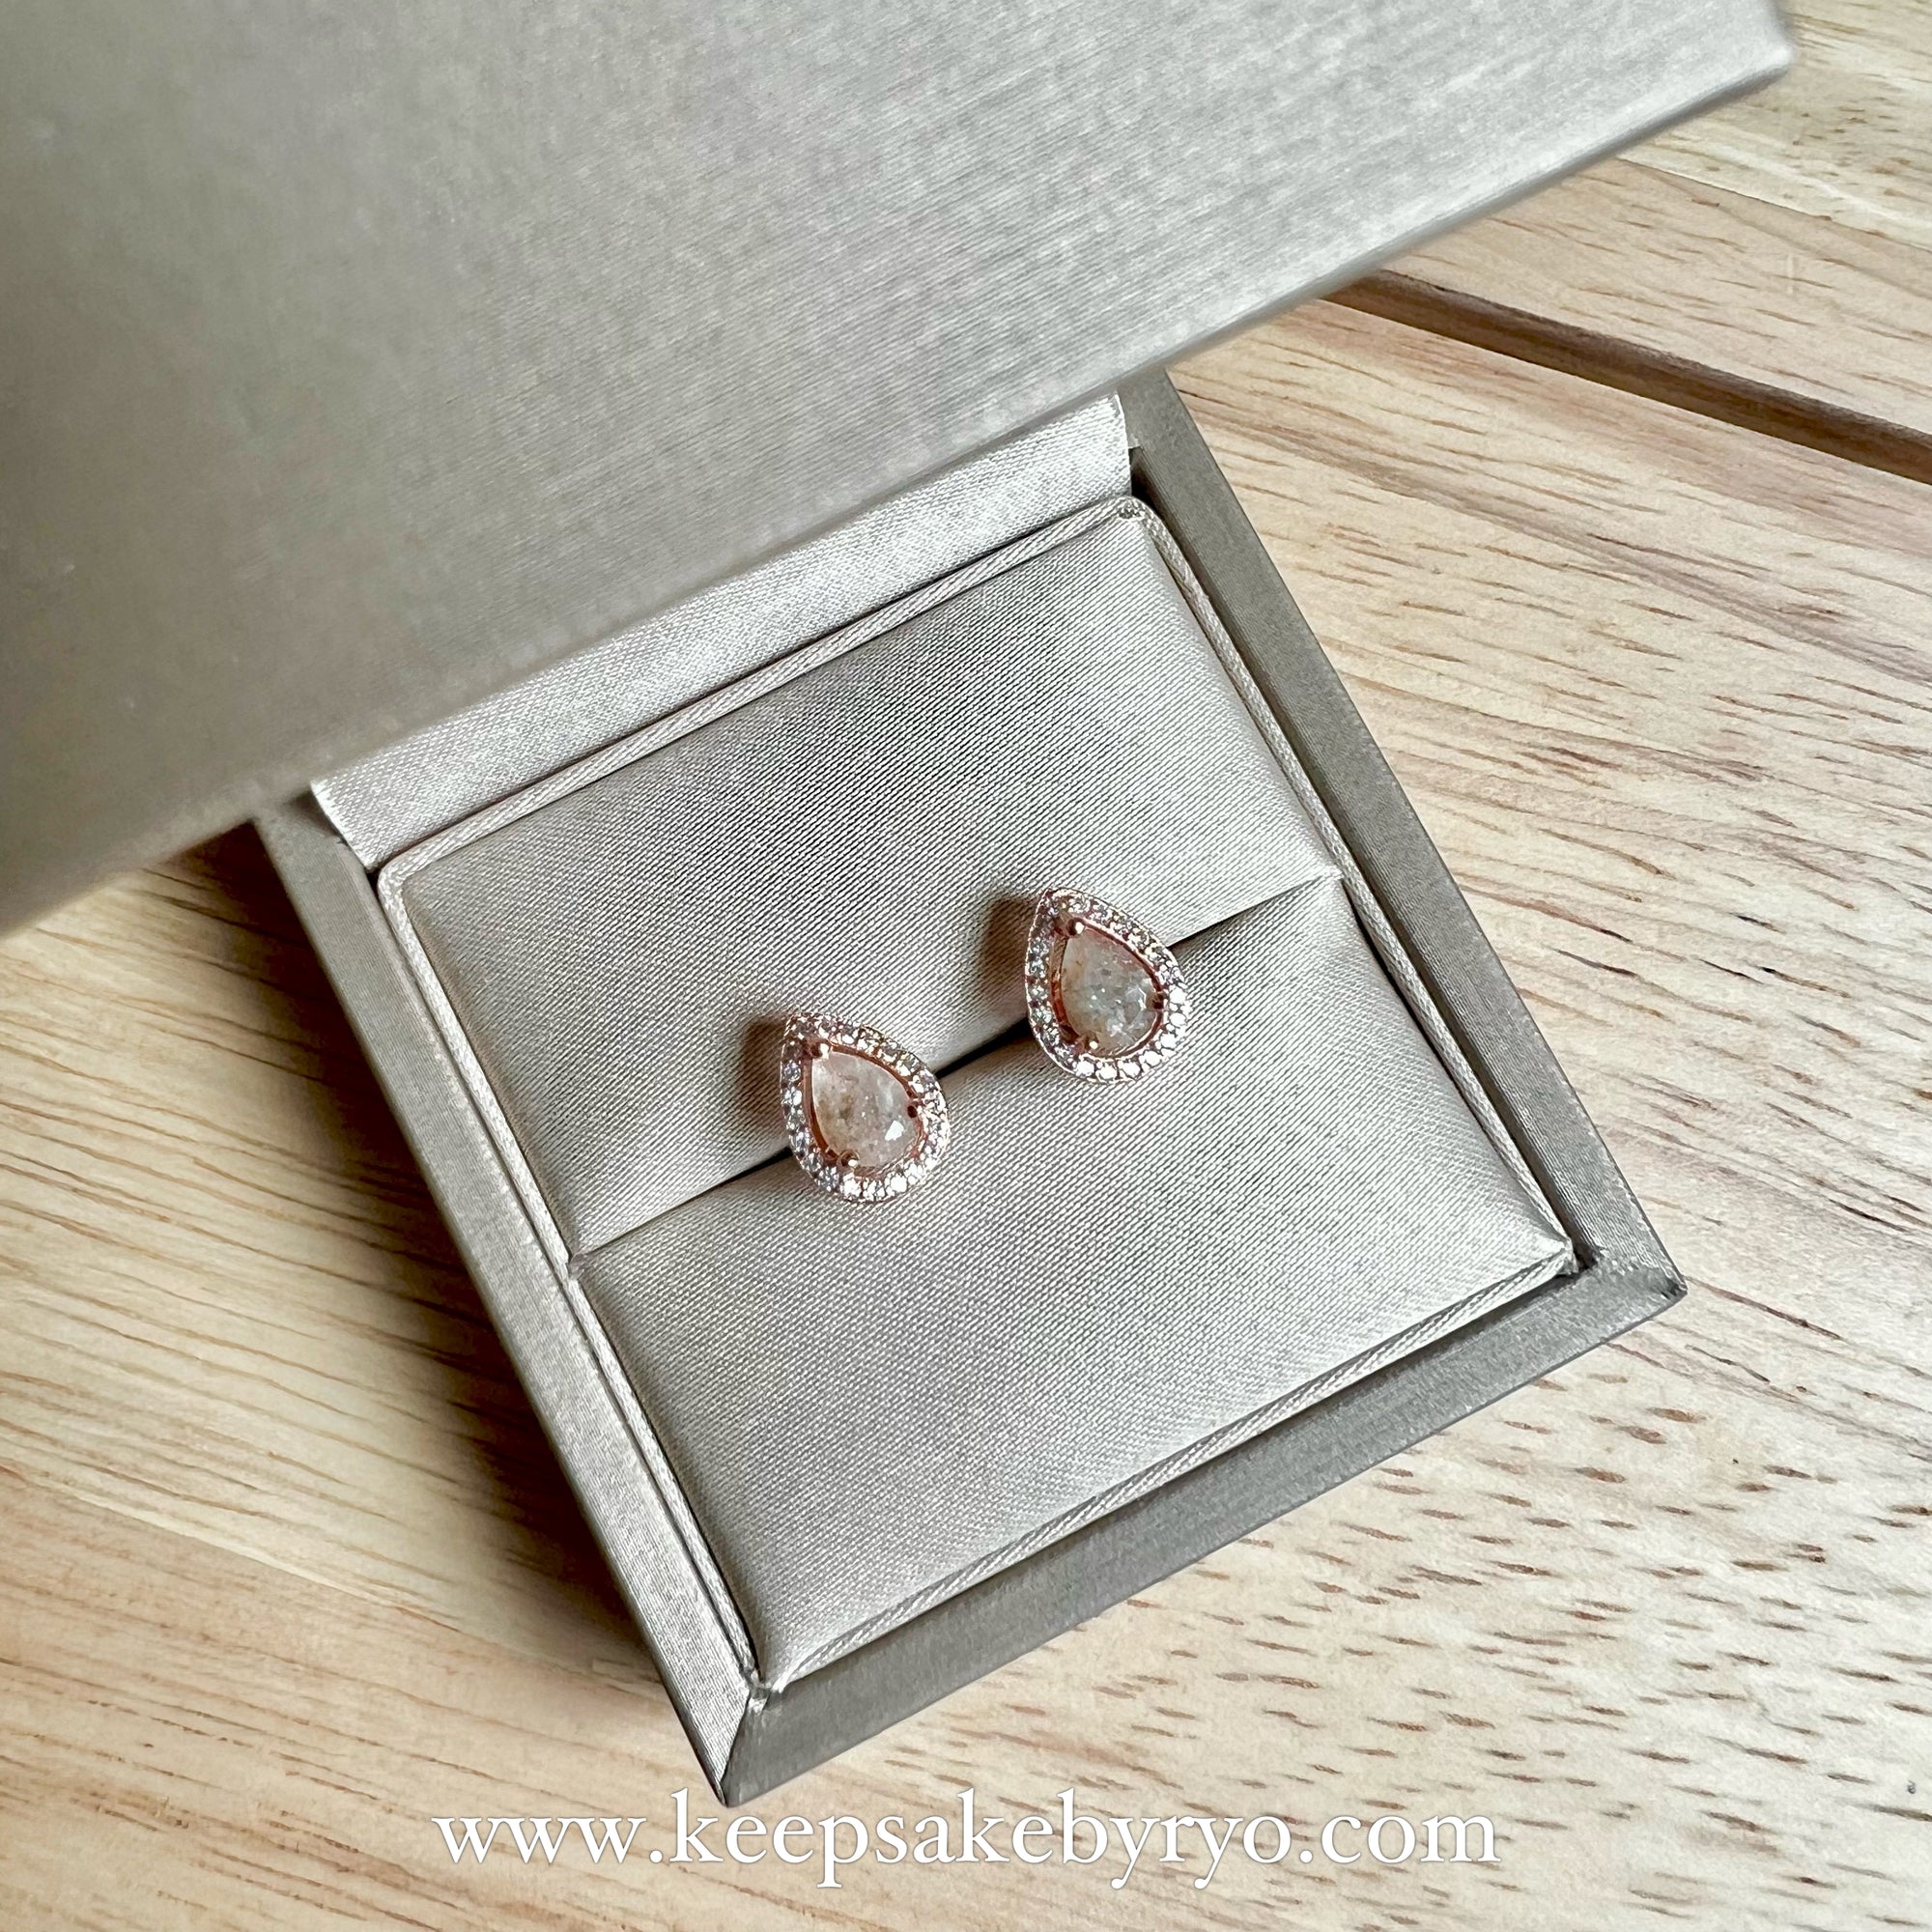 ASHES 925 SOLITAIRE: ARYA STUD EARRINGS WITH TEARDROP INCLUSION STONES